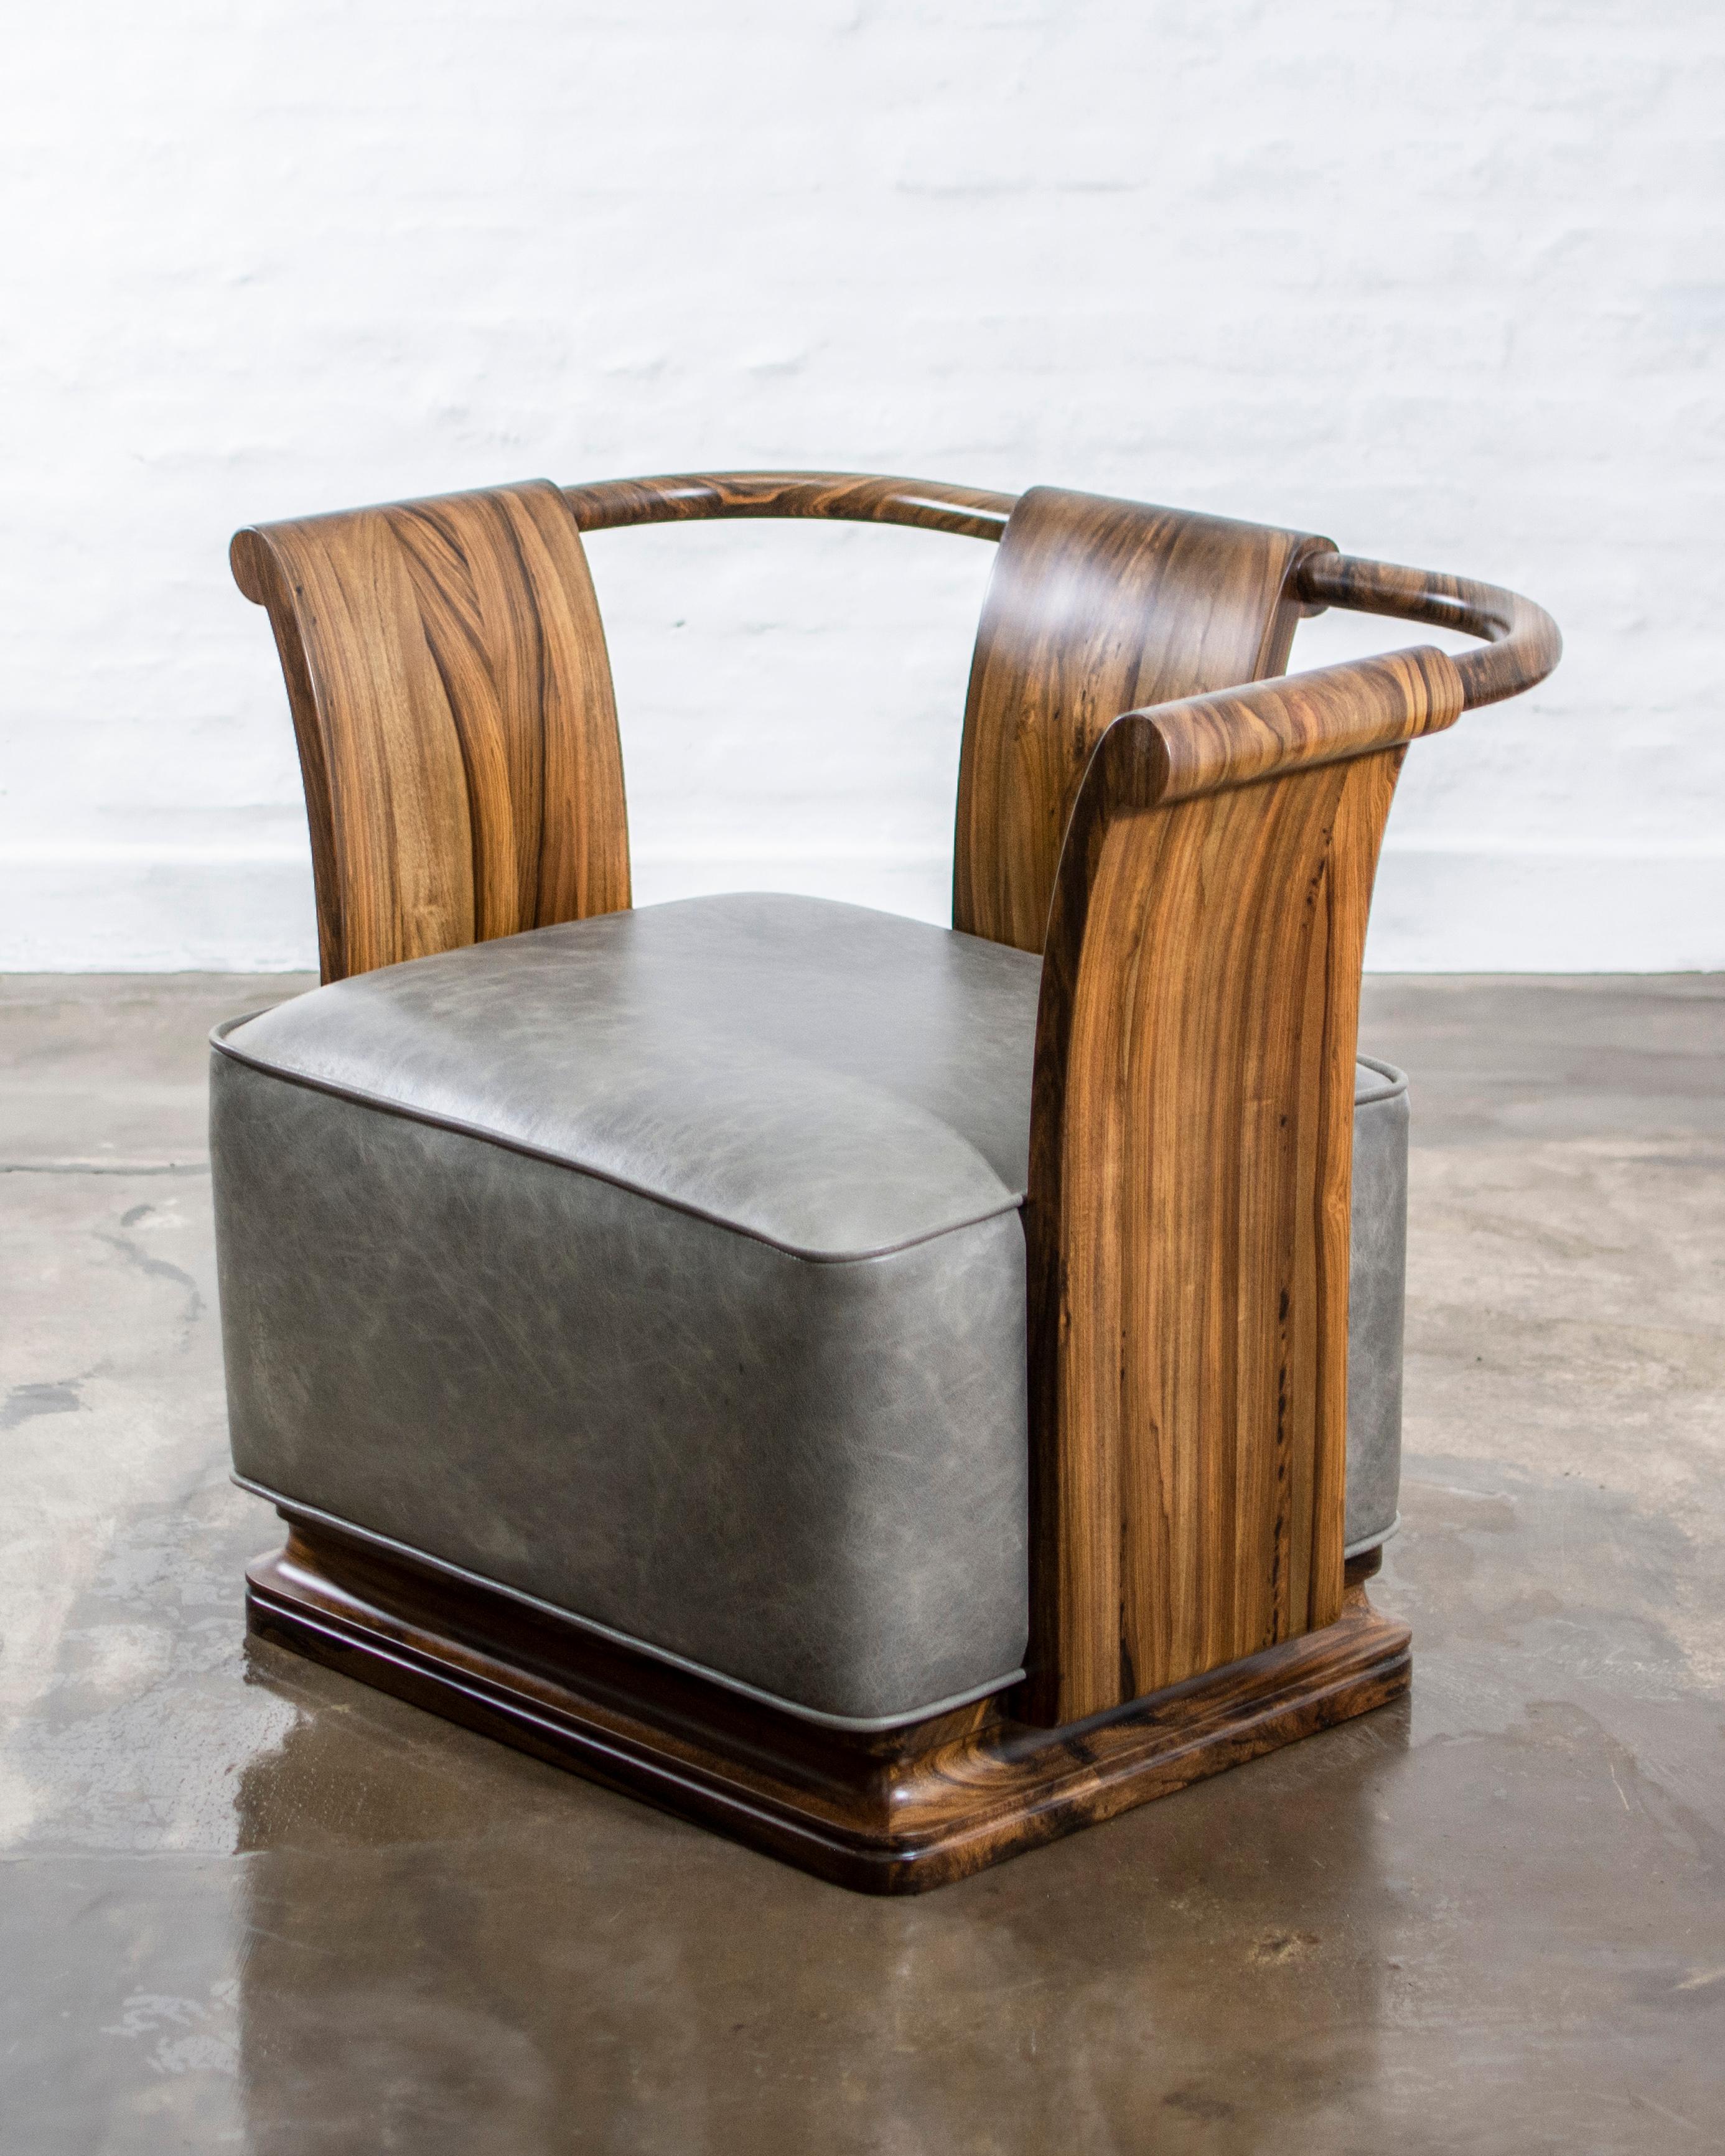 The Simone Chair’s gently sloping sides and back allude to forms from early 20th century, Art Deco style. Shown in Argentine Rosewood finish and but available in various finishes and the upholstery material of your choice. Debuted at Costantini's